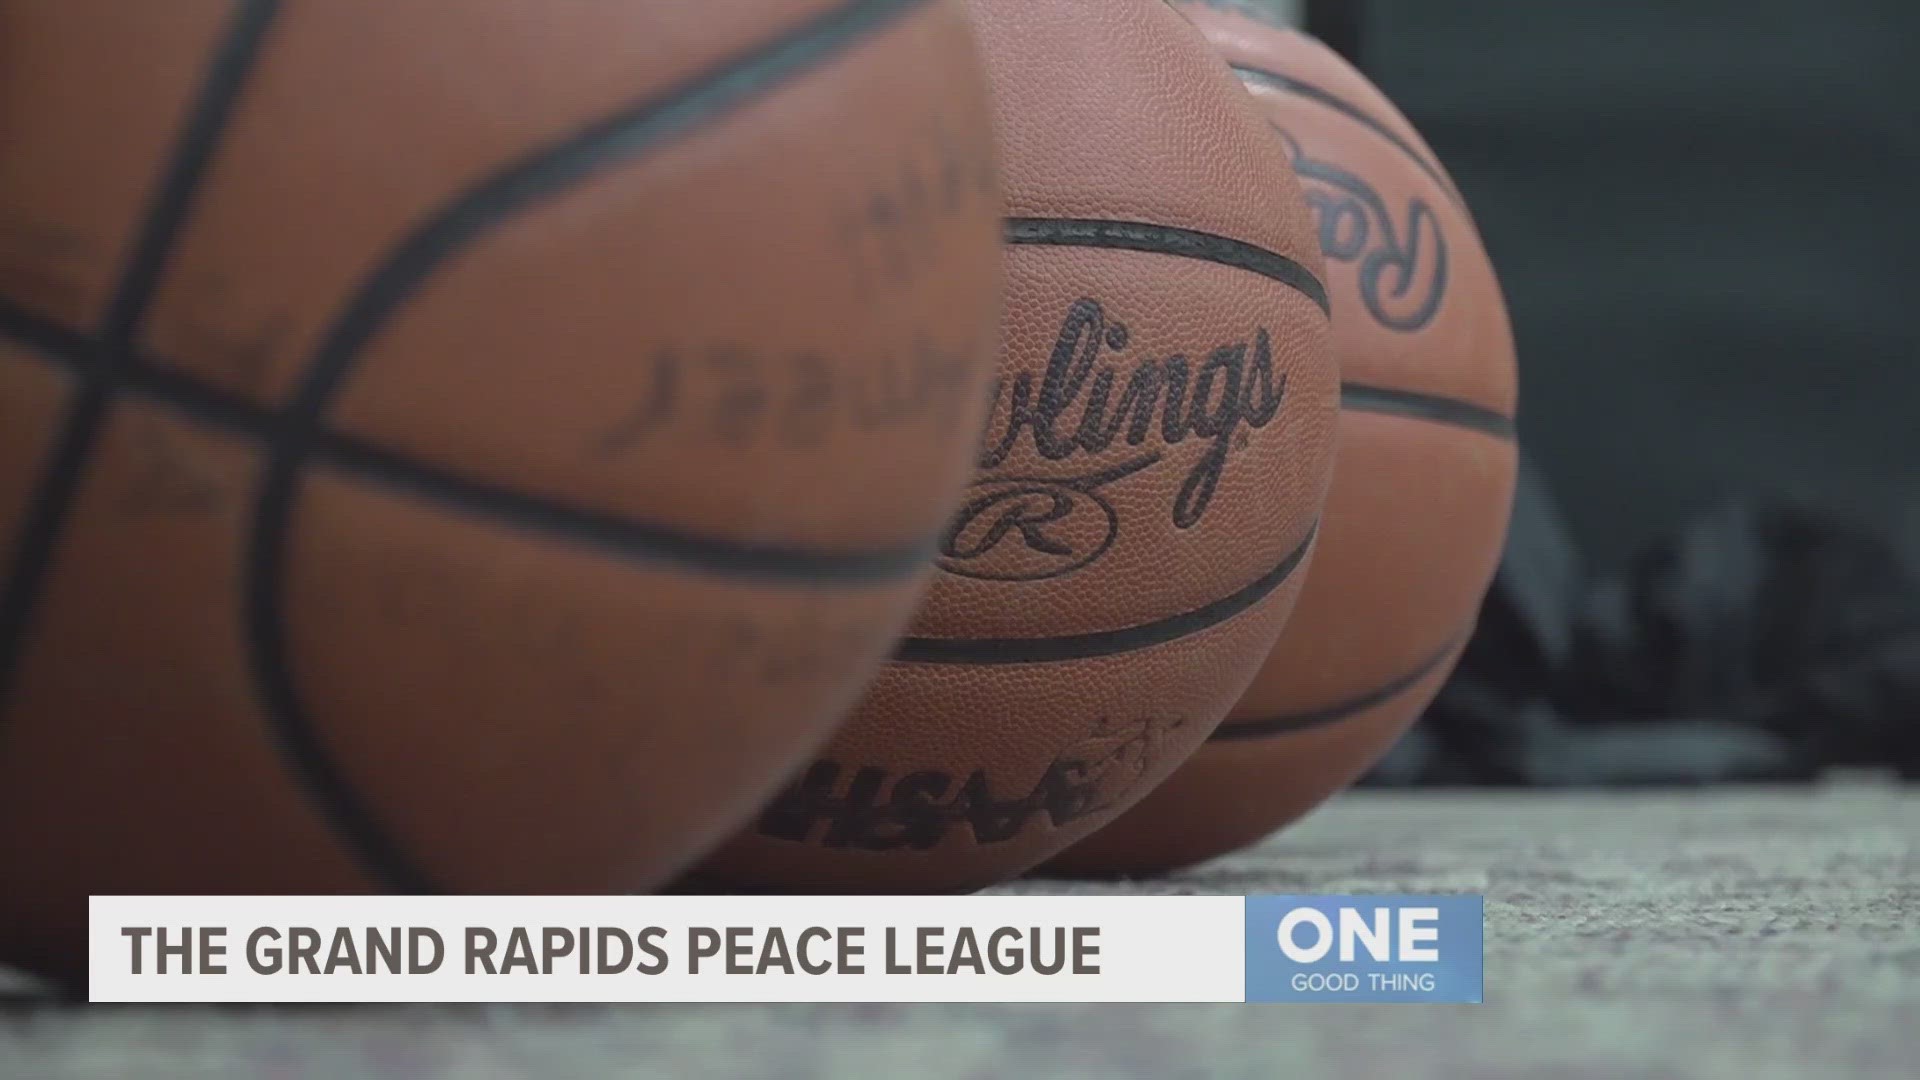 Coach Mell Hatchett started the Peace League with the idea of giving kids a better life than what he had growing up.